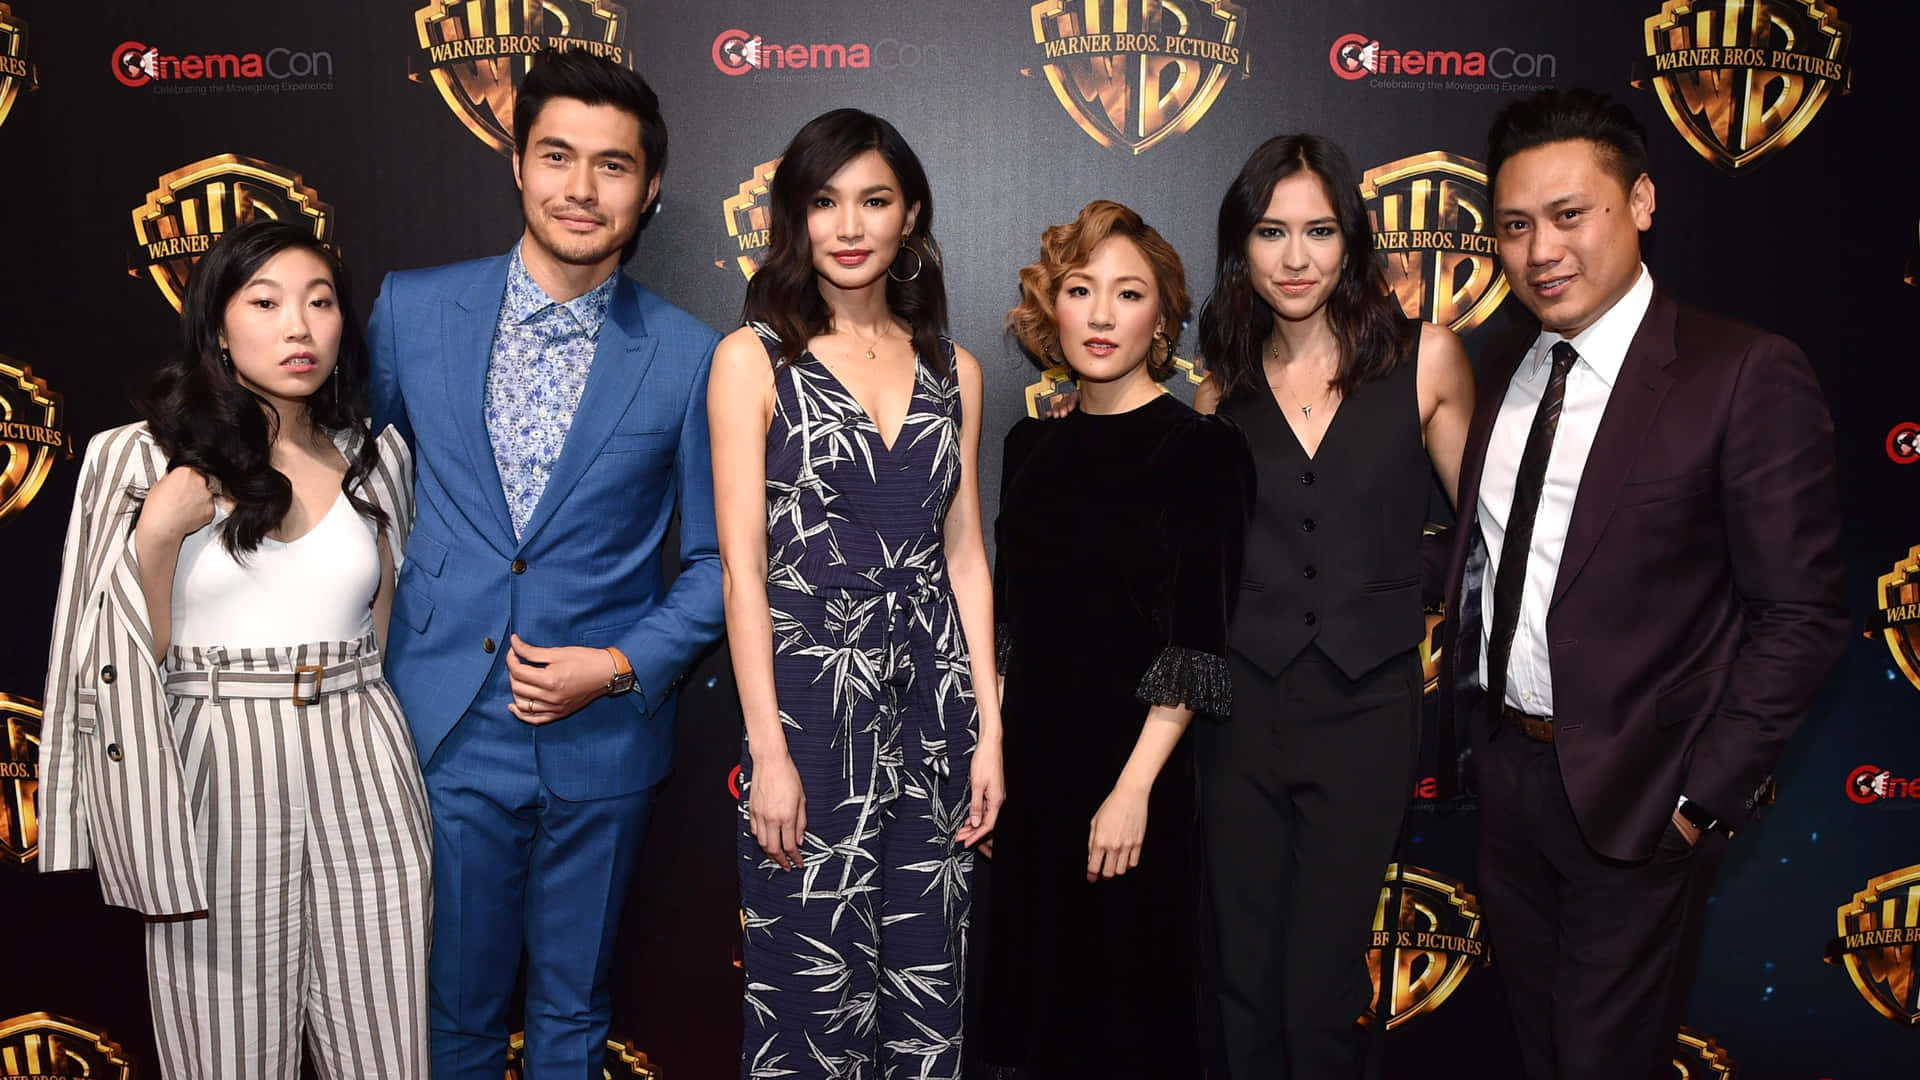 Crazy Rich Asians shines in all the right places